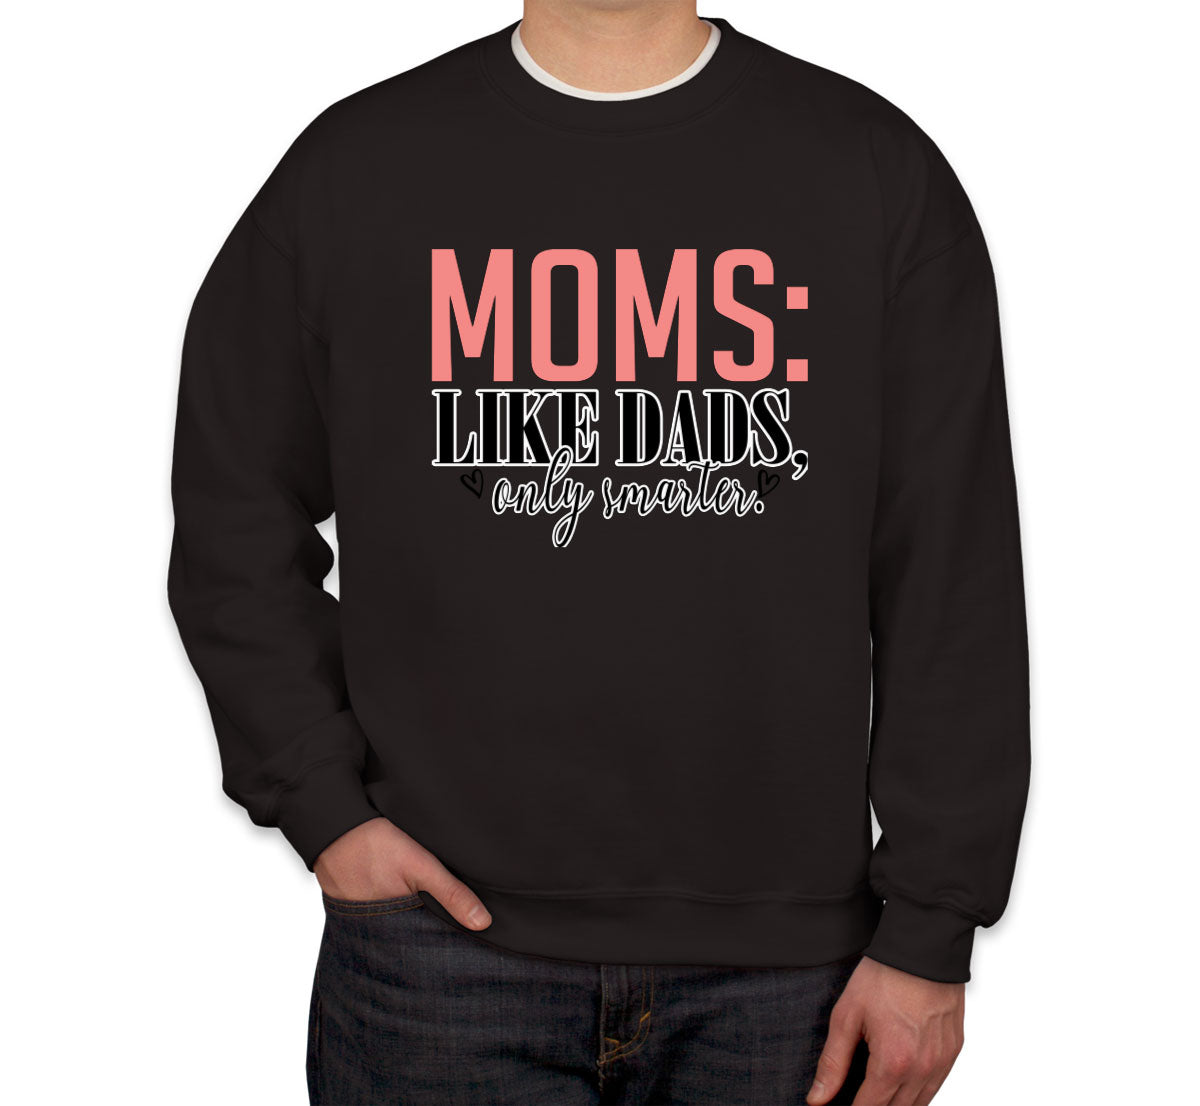 Moms Like Dads Only Smarter Mother's Day Unisex Sweatshirt